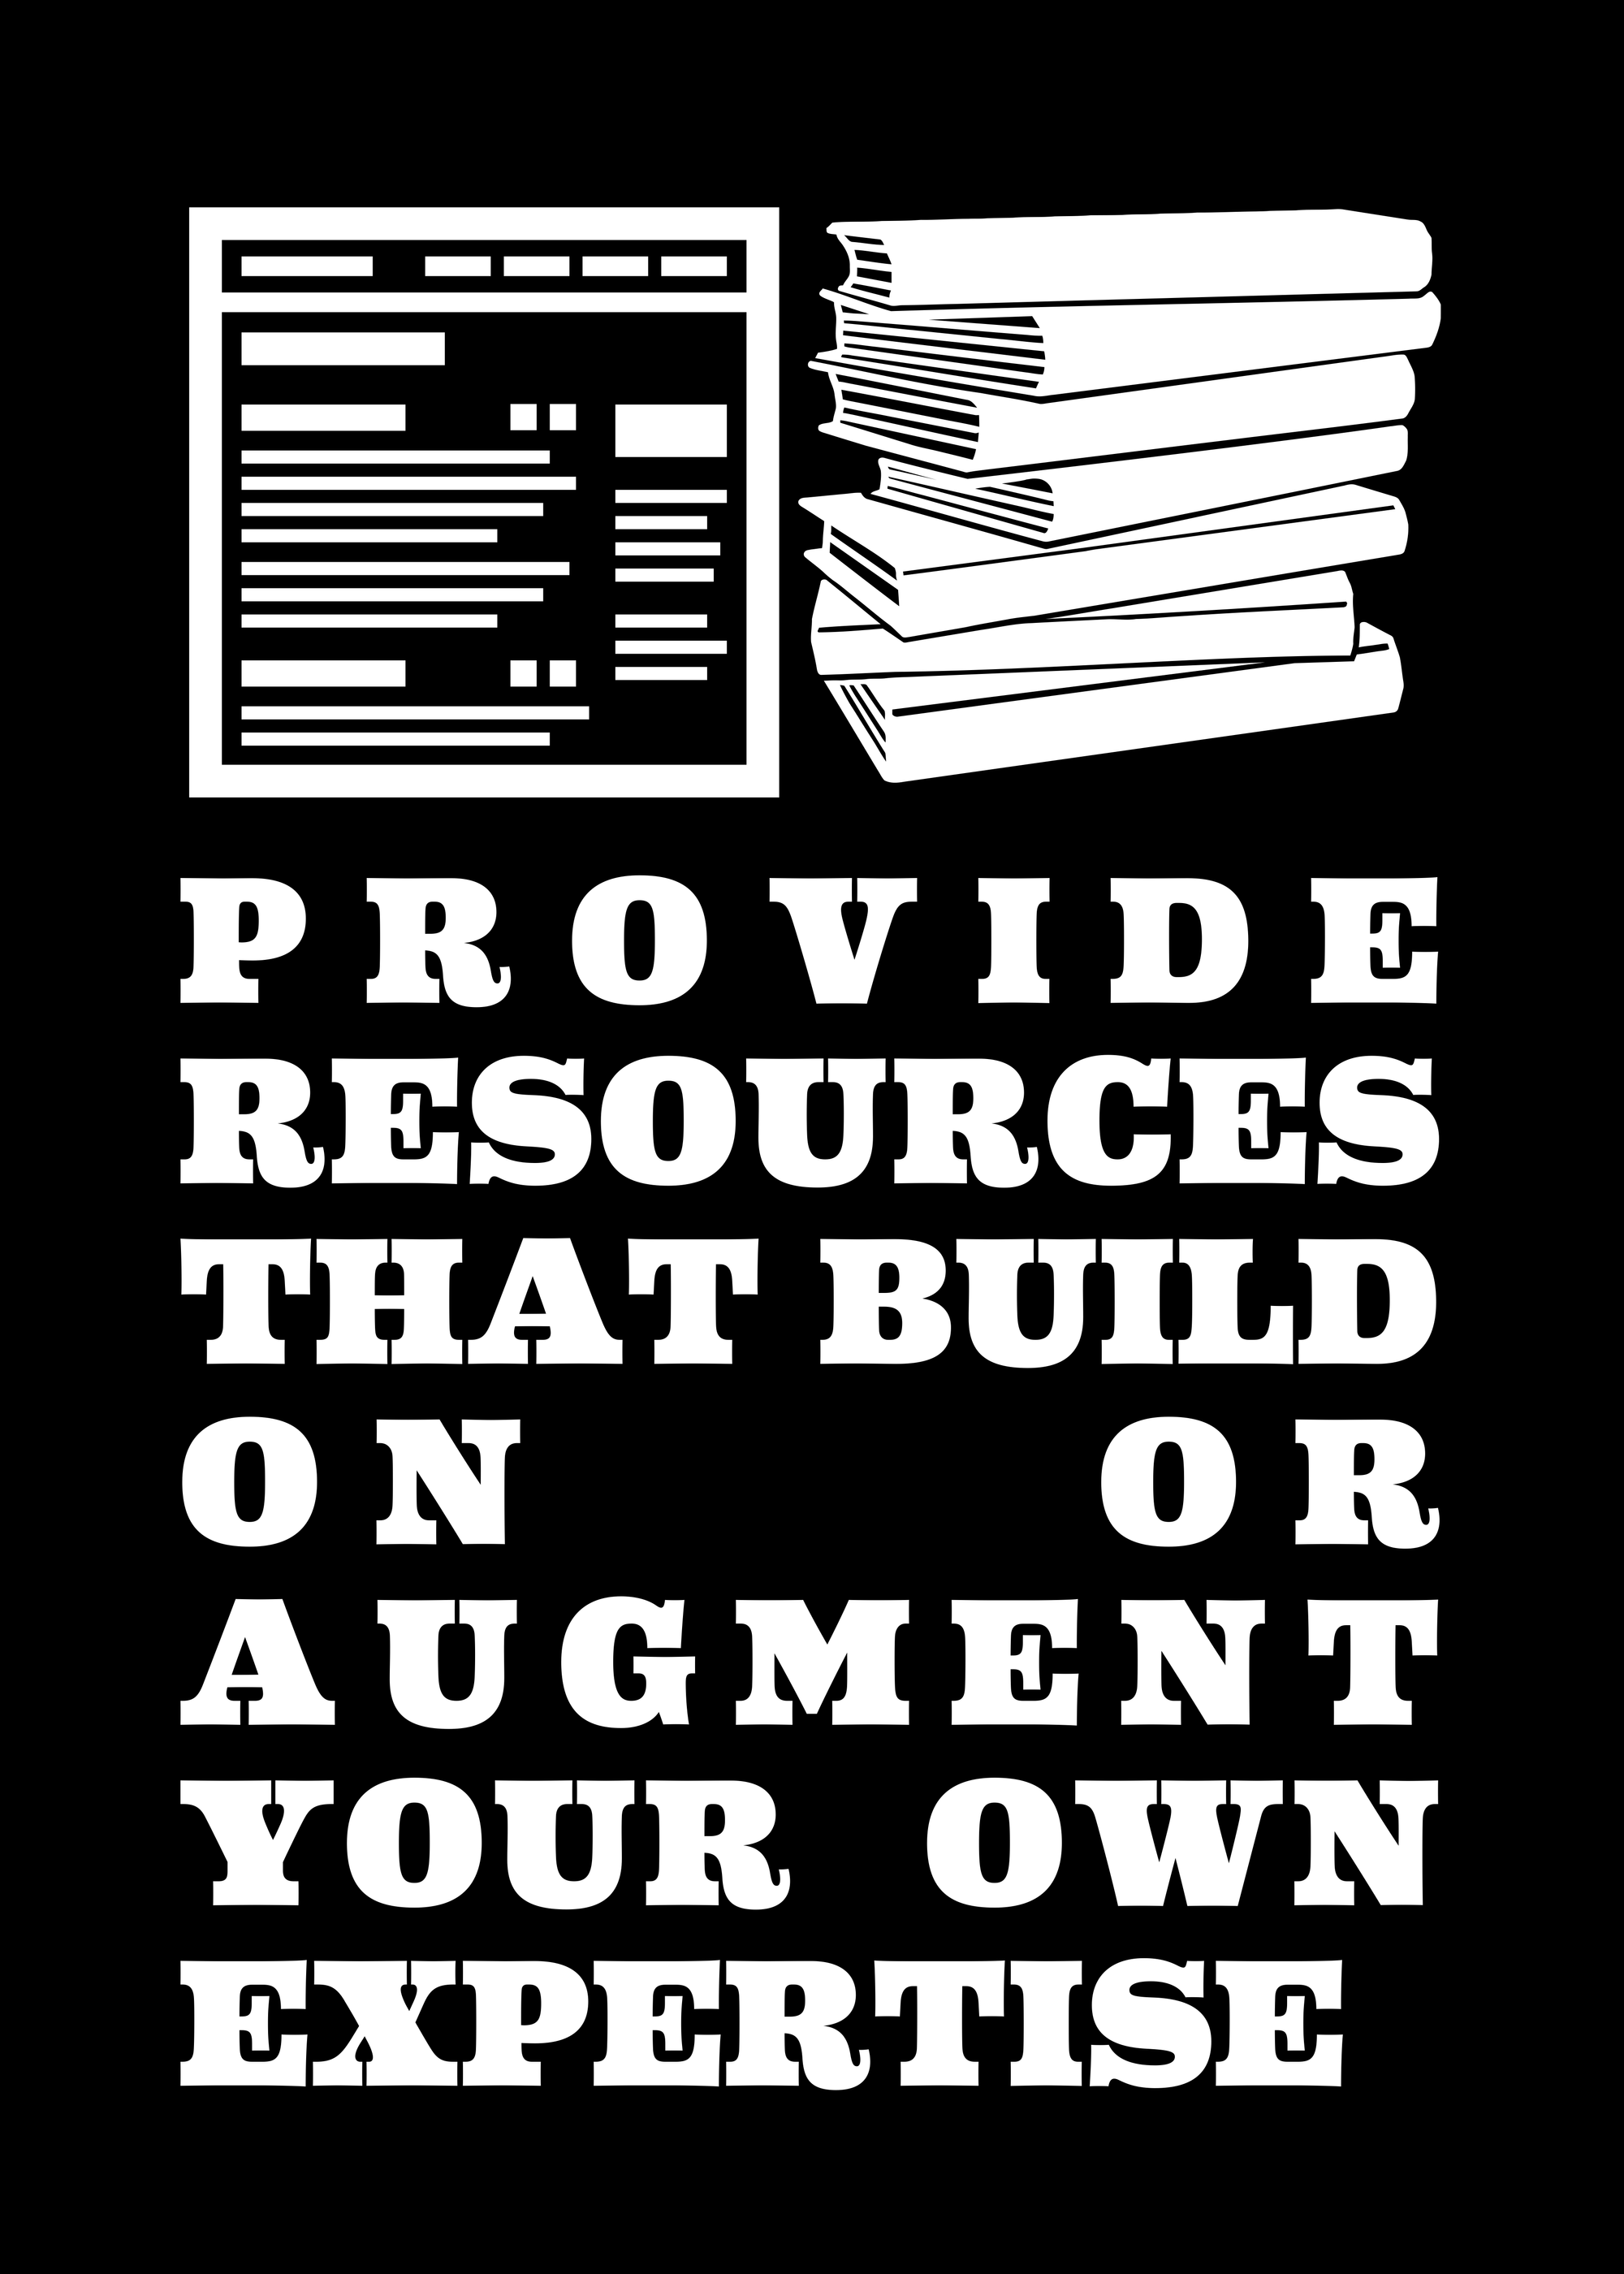 Provide resources that build on or augment your own expertise